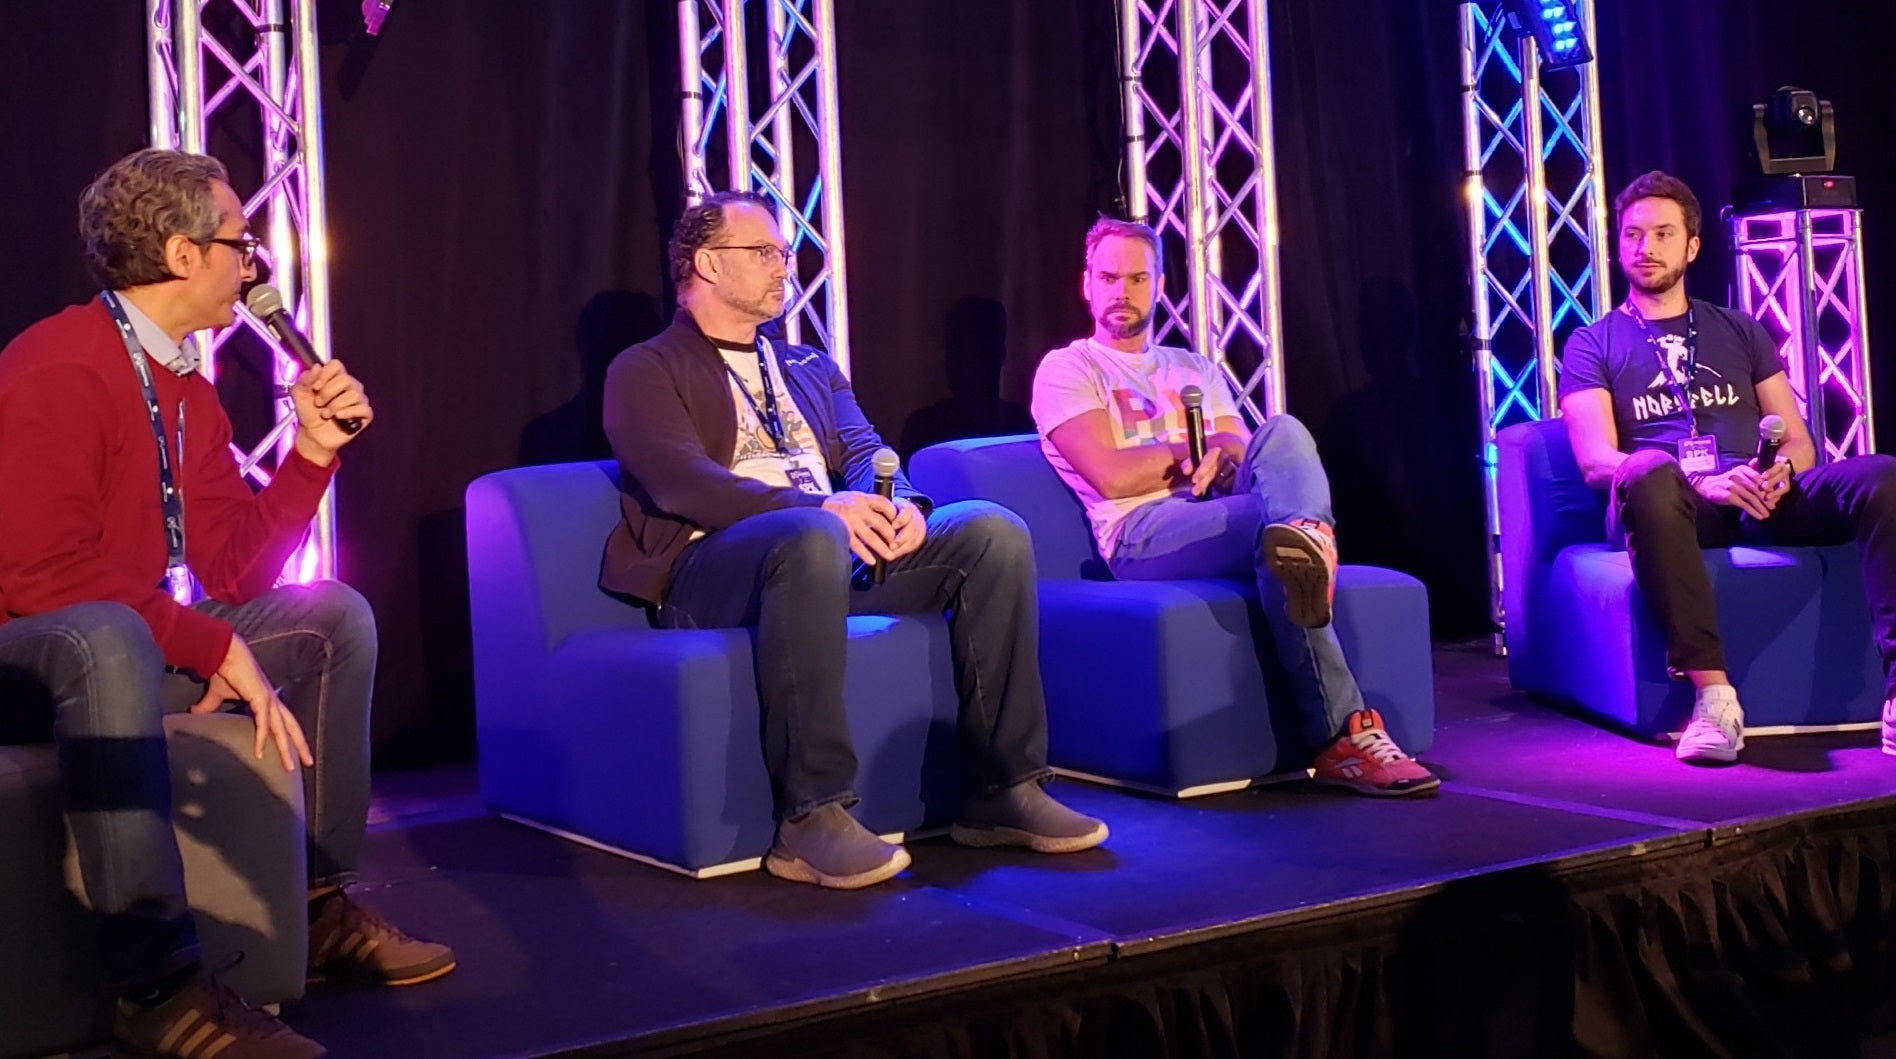 From left, Shum Singh, Trent Oster, Johan Eile, and Julian Maroda at a Megamigs panel discussion